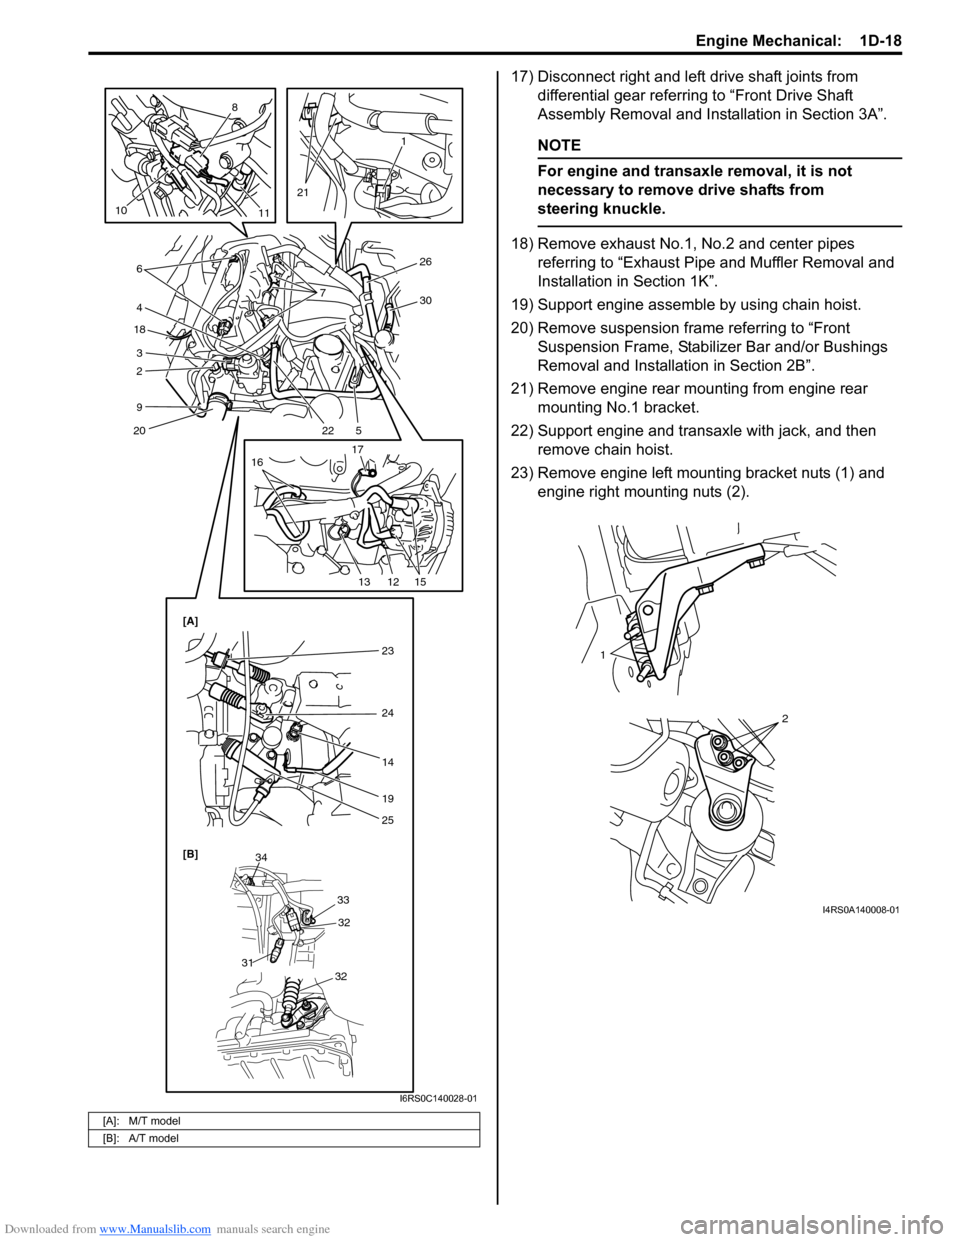 SUZUKI SWIFT 2008 2.G Service Workshop Manual Downloaded from www.Manualslib.com manuals search engine Engine Mechanical:  1D-18
17) Disconnect right and left drive shaft joints from differential gear referring to “Front Drive Shaft 
Assembly R